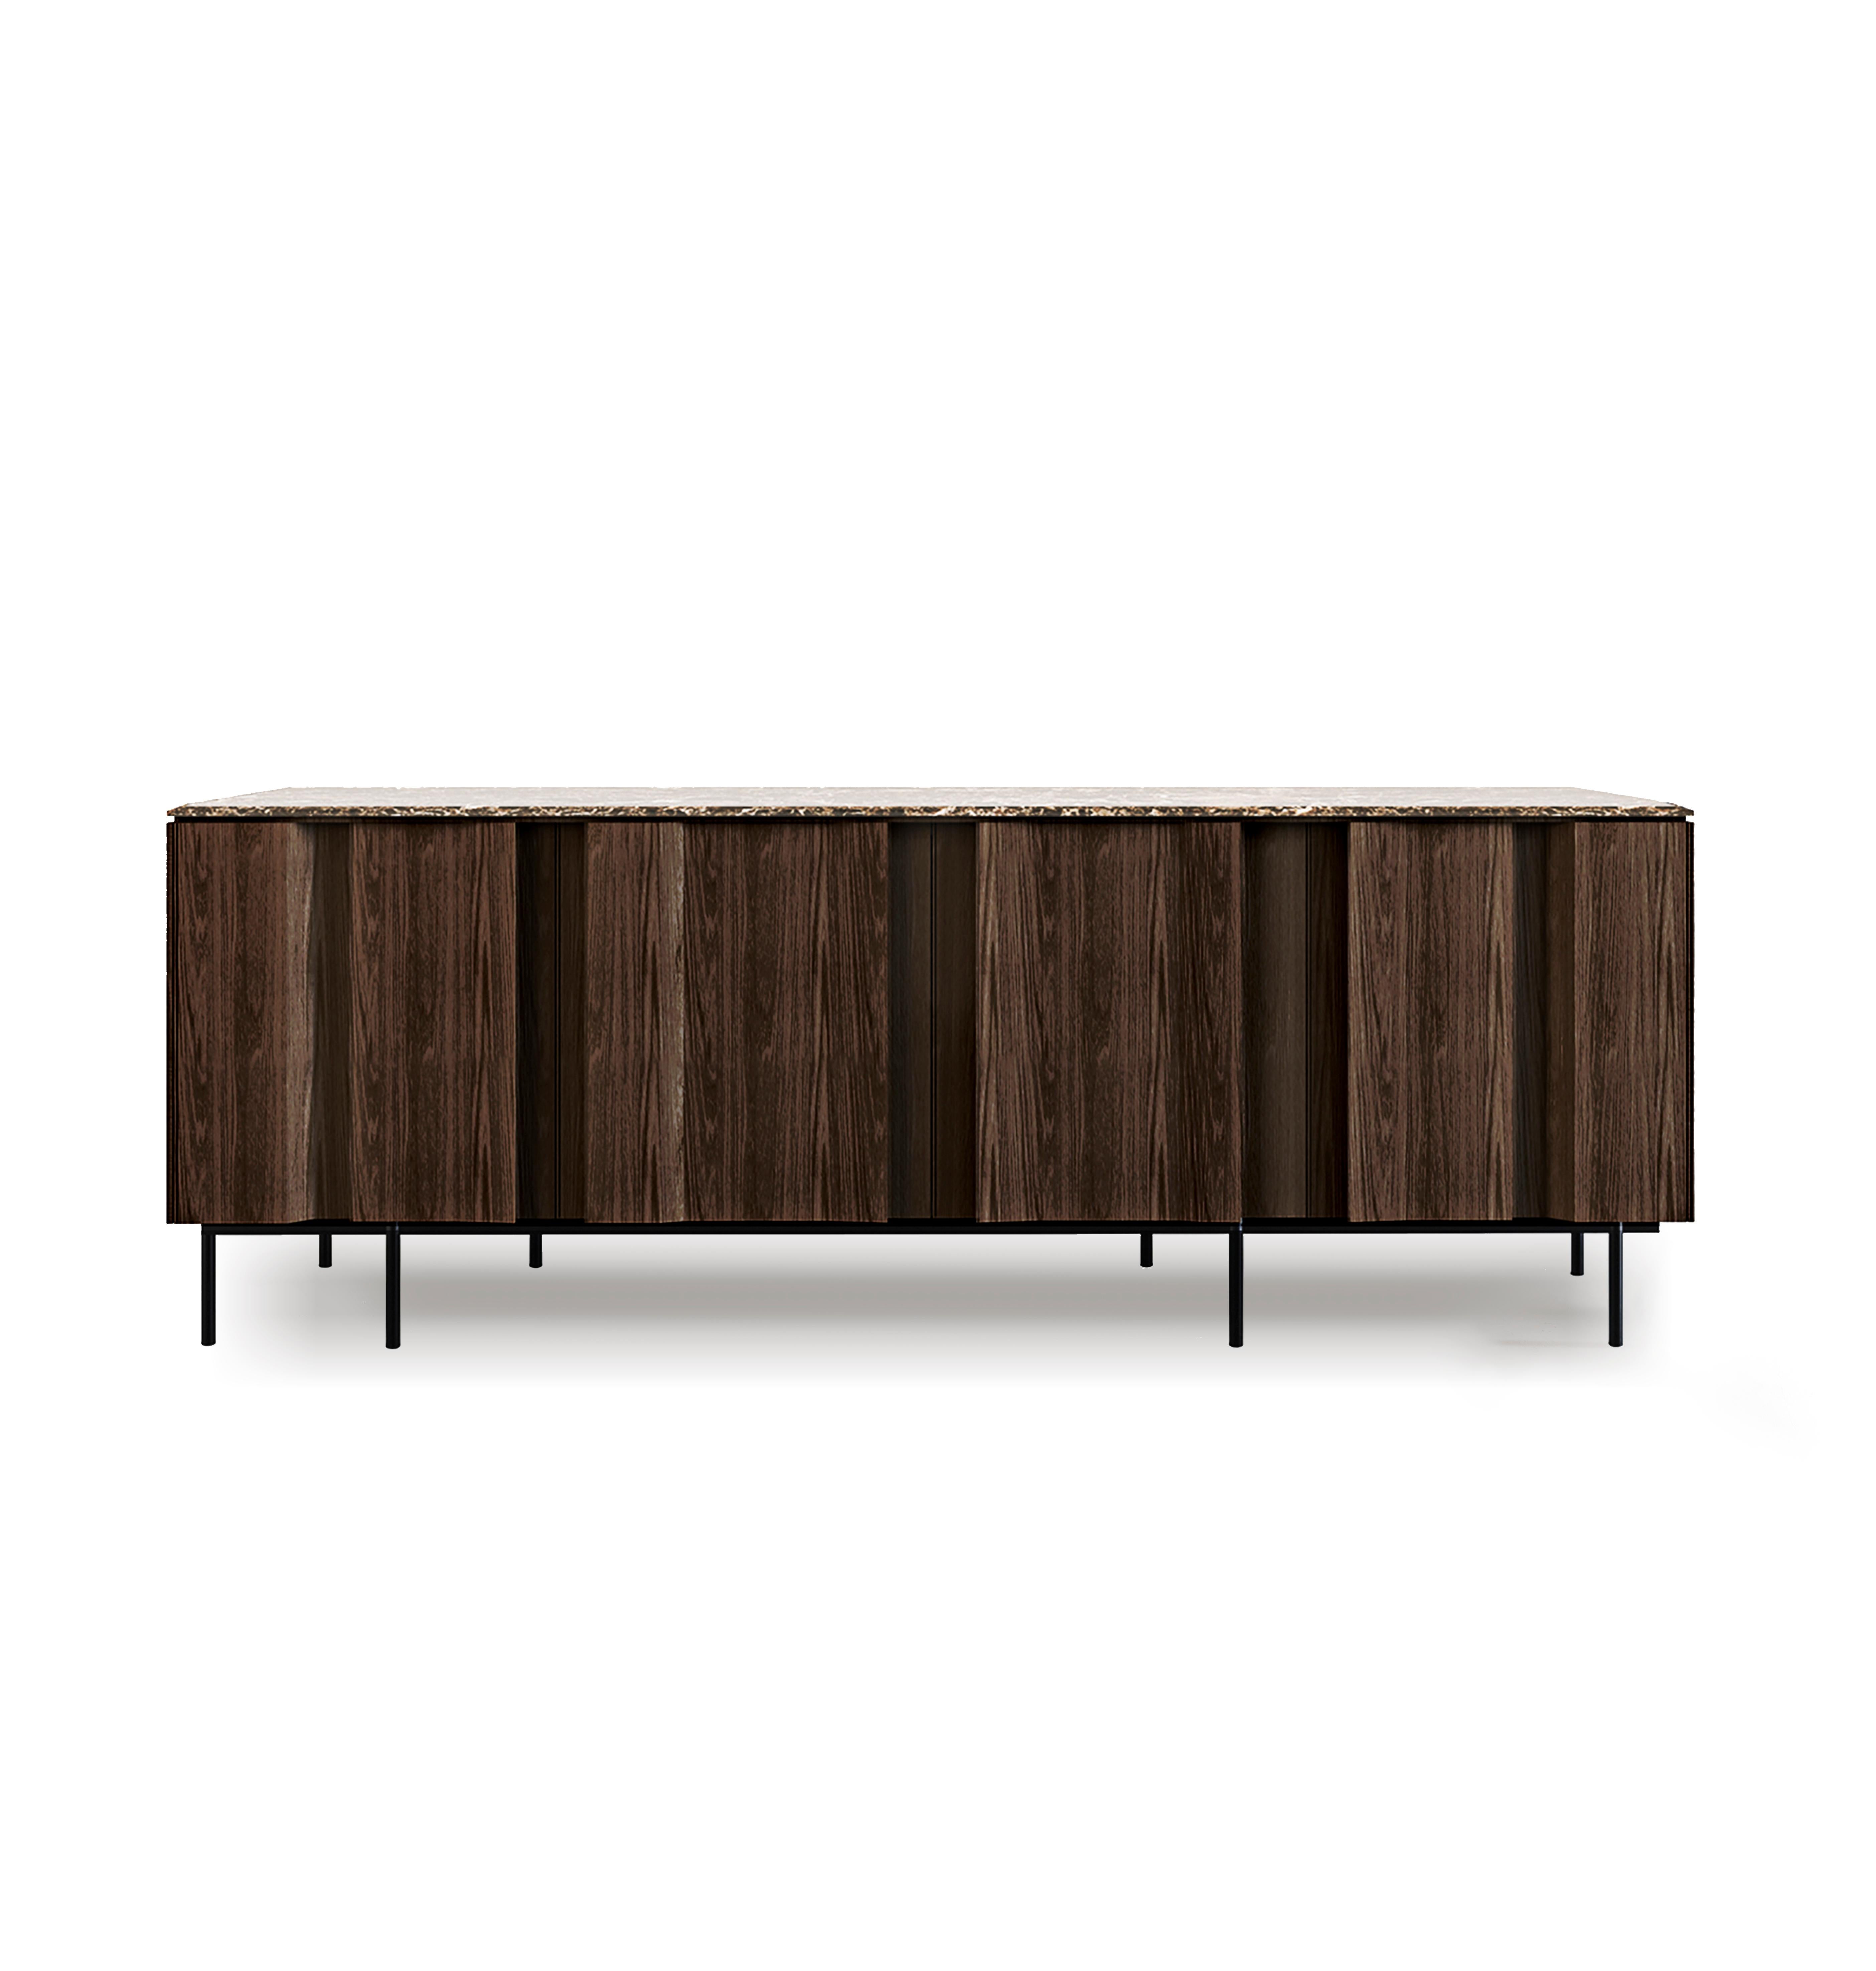 Contemporary Modern Bryant Studio Sideboard in Dark Oak & Marble by Collector

A series of vertical lines runs from top to bottom shaping the fluctuating alignment of the doors and creating a game of light and shade trough the wooden panels. The